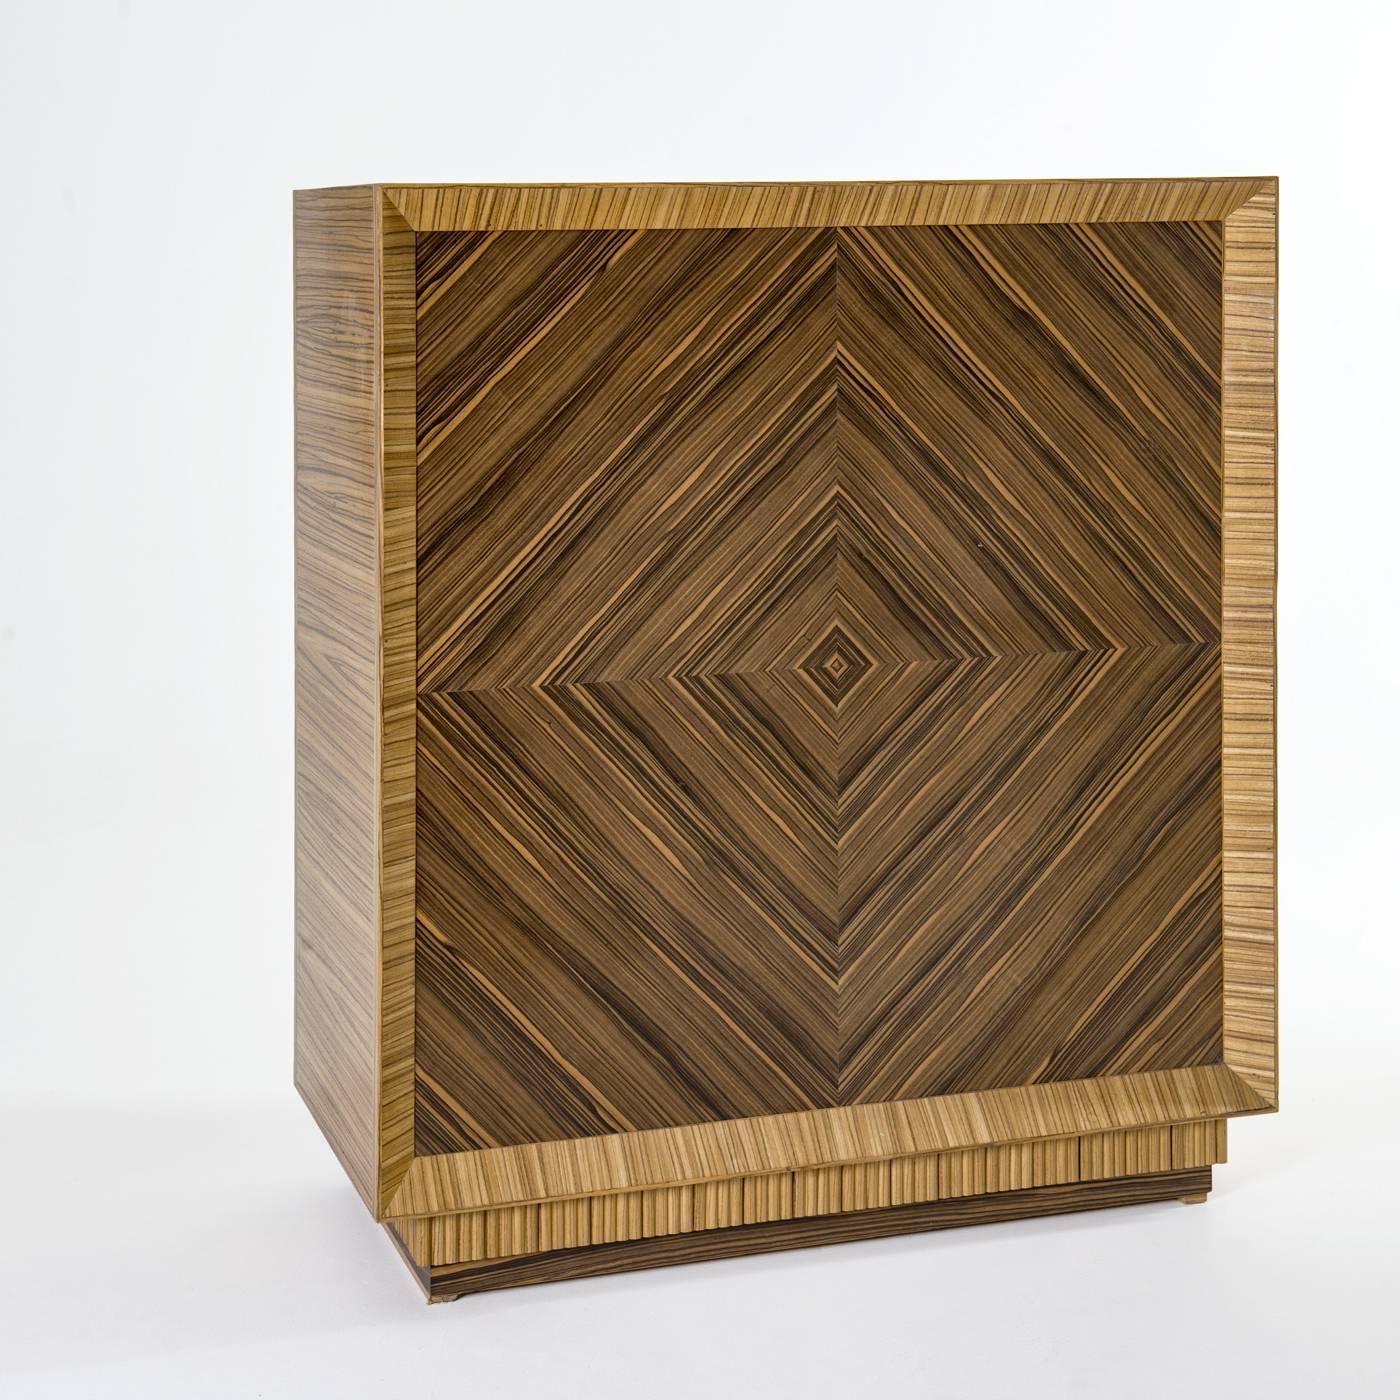 This unique chest of drawers will make a statement when placed in a bedroom or walk-in closet. The exterior structure is crafted in solid wood with a striking zebra-striped pattern. The front and back of the piece are in ebony Macassar wood with a